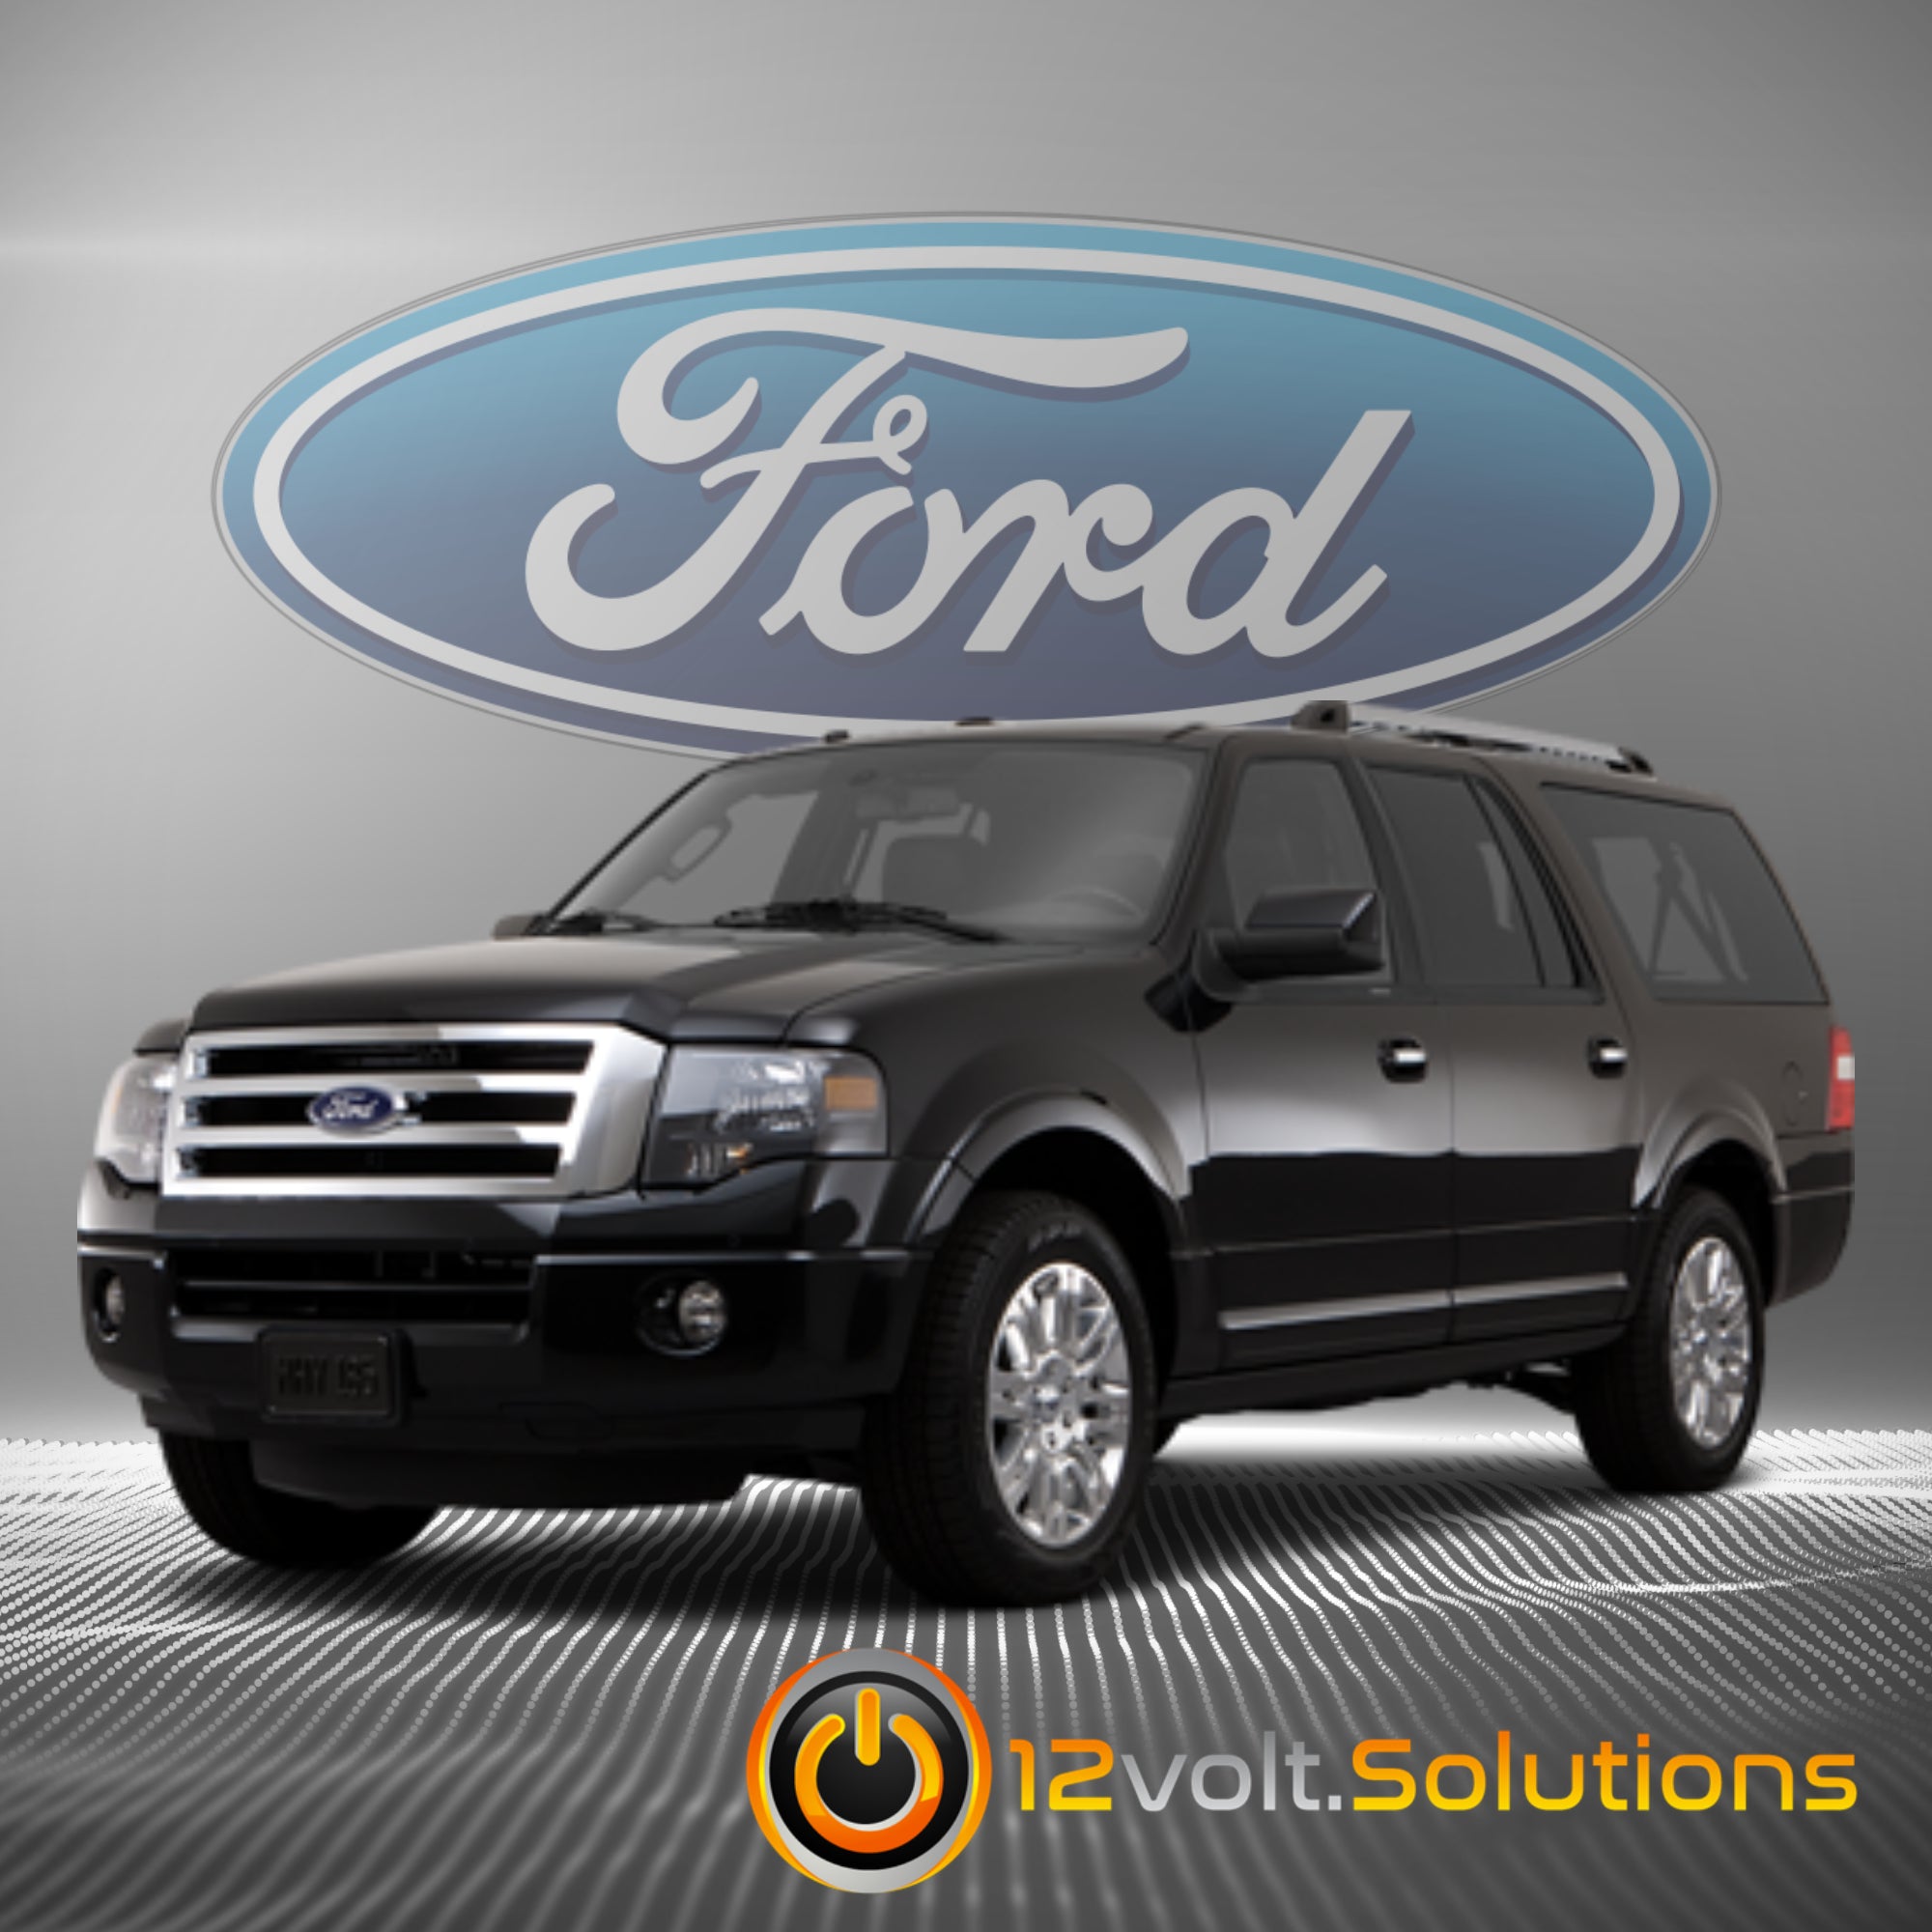 2011-2014 Ford Expedition Remote Start Plug and Play Kit-12Volt.Solutions